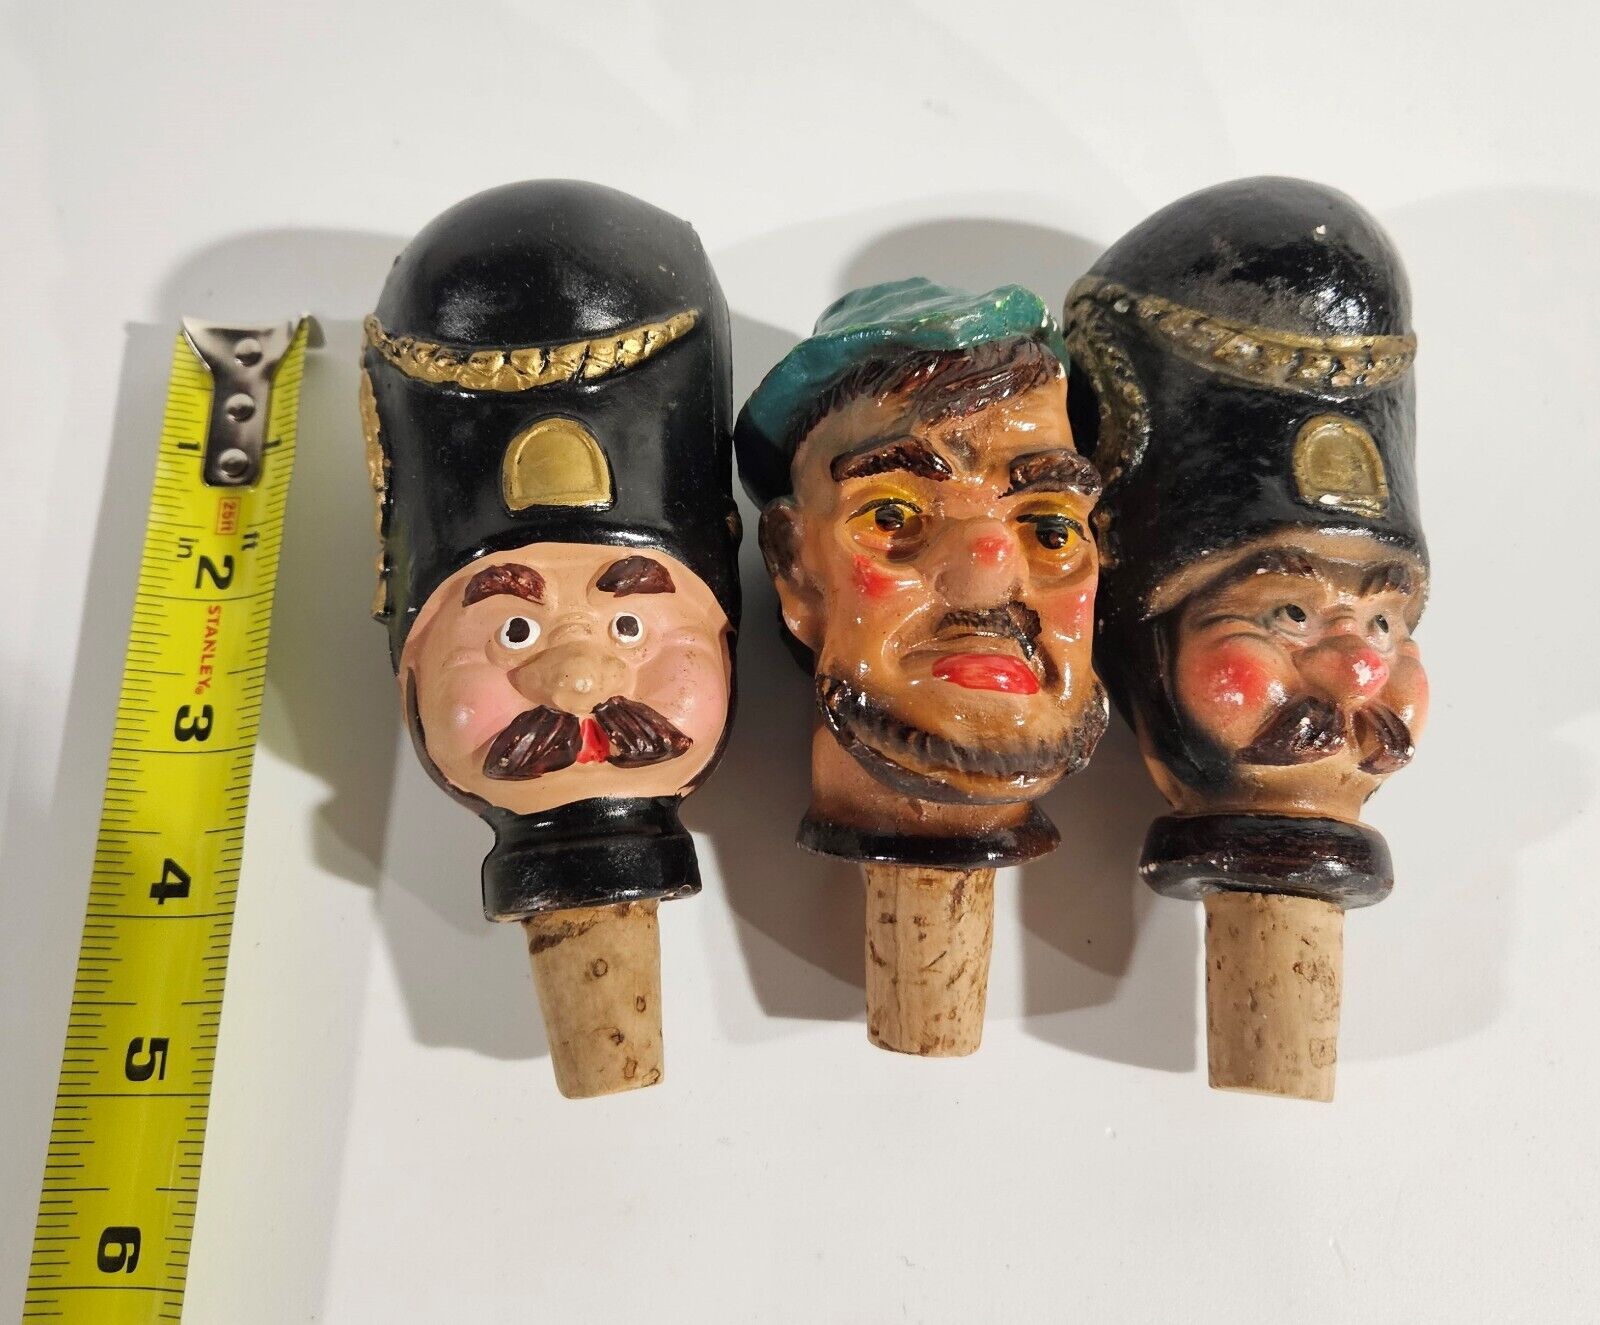 British Foot Guard Heads - Wine Bottle Cork - Lot of 3 - RARE & Eclectic